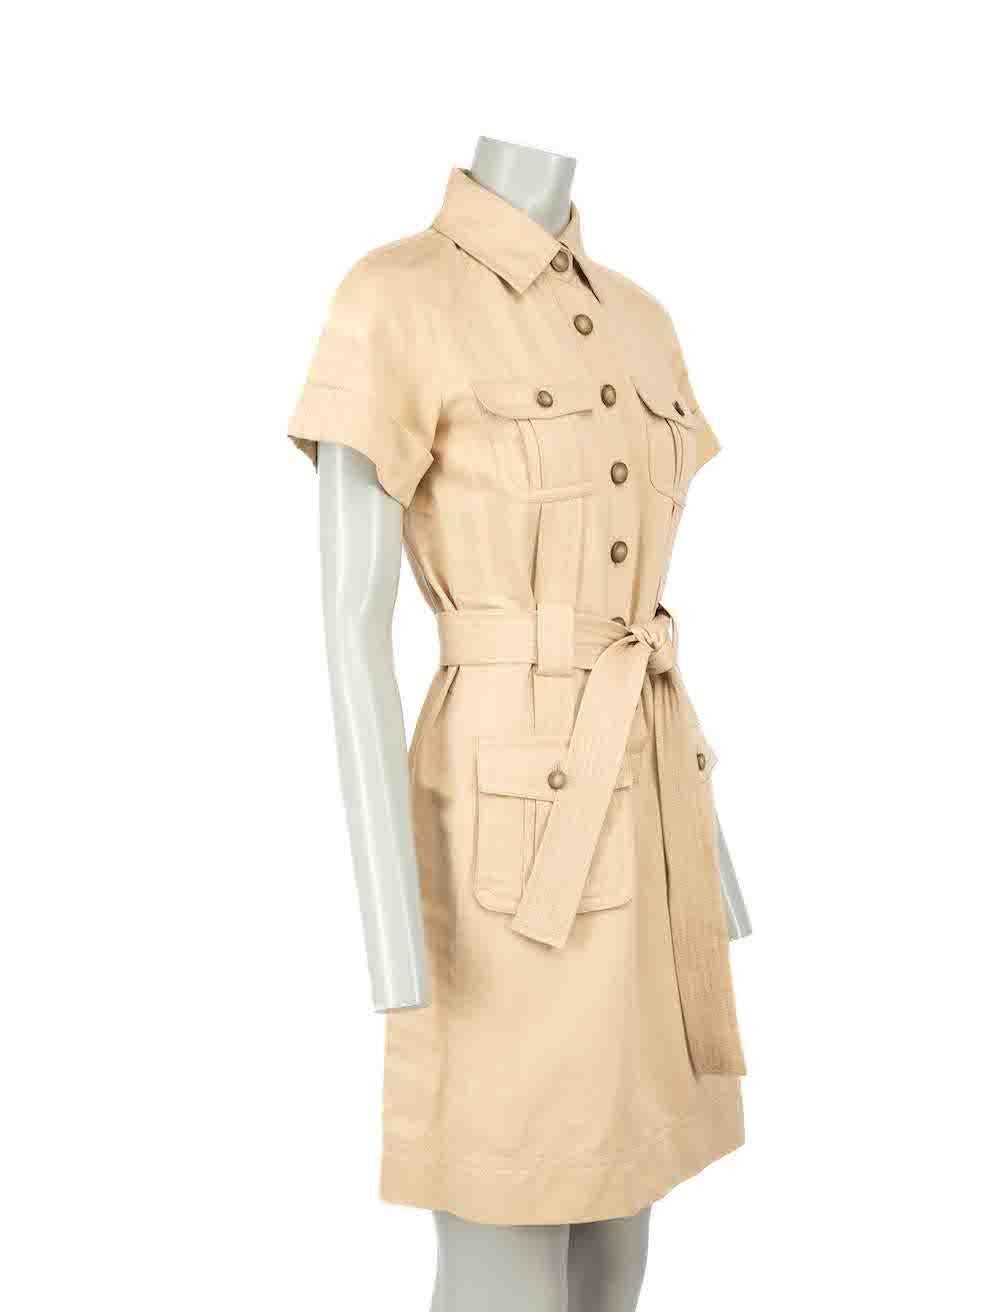 CONDITION is Good. Minor wear to dress is evident. Light wear to fabric composition with one or to very small discoloured marks and plucks to the weave found on this used Diane Von Furstenberg designer resale item.
 
Details
Beige
Cotton
Mini